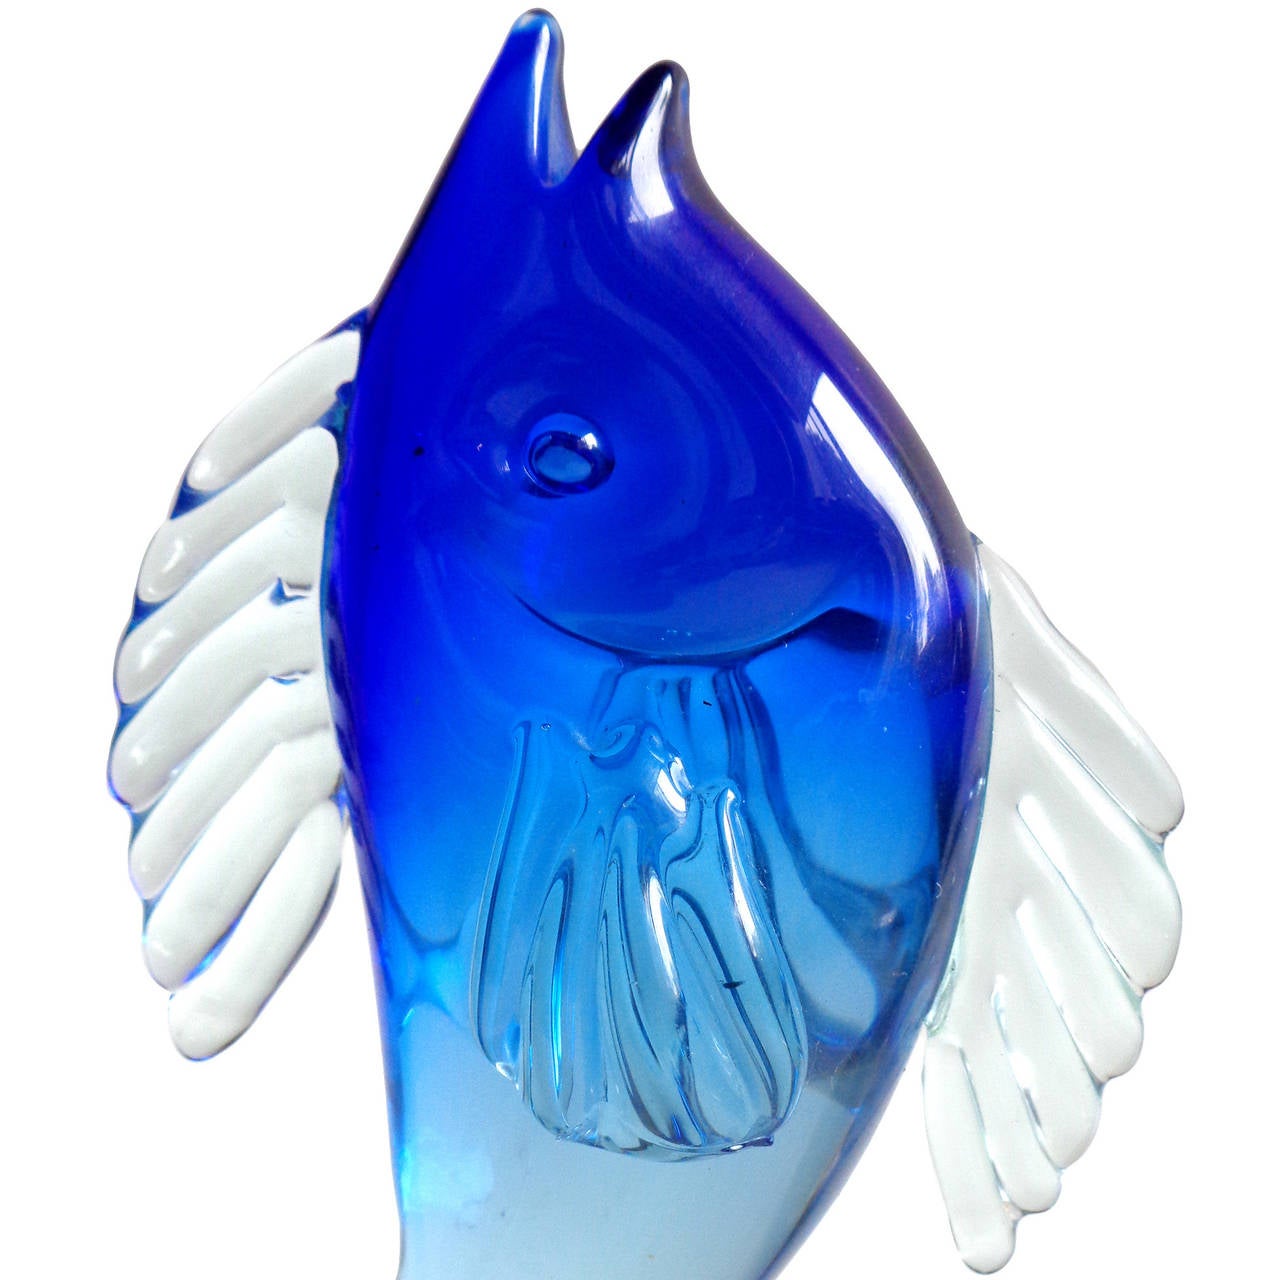 Priced per item (2 colors available as shown). Beautiful vintage Murano hand blown Sommerso cobalt blue and green Italian art glass fish sculptures. Documented to designer Alfredo Barbini. The green fish has 2 original labels, including one with